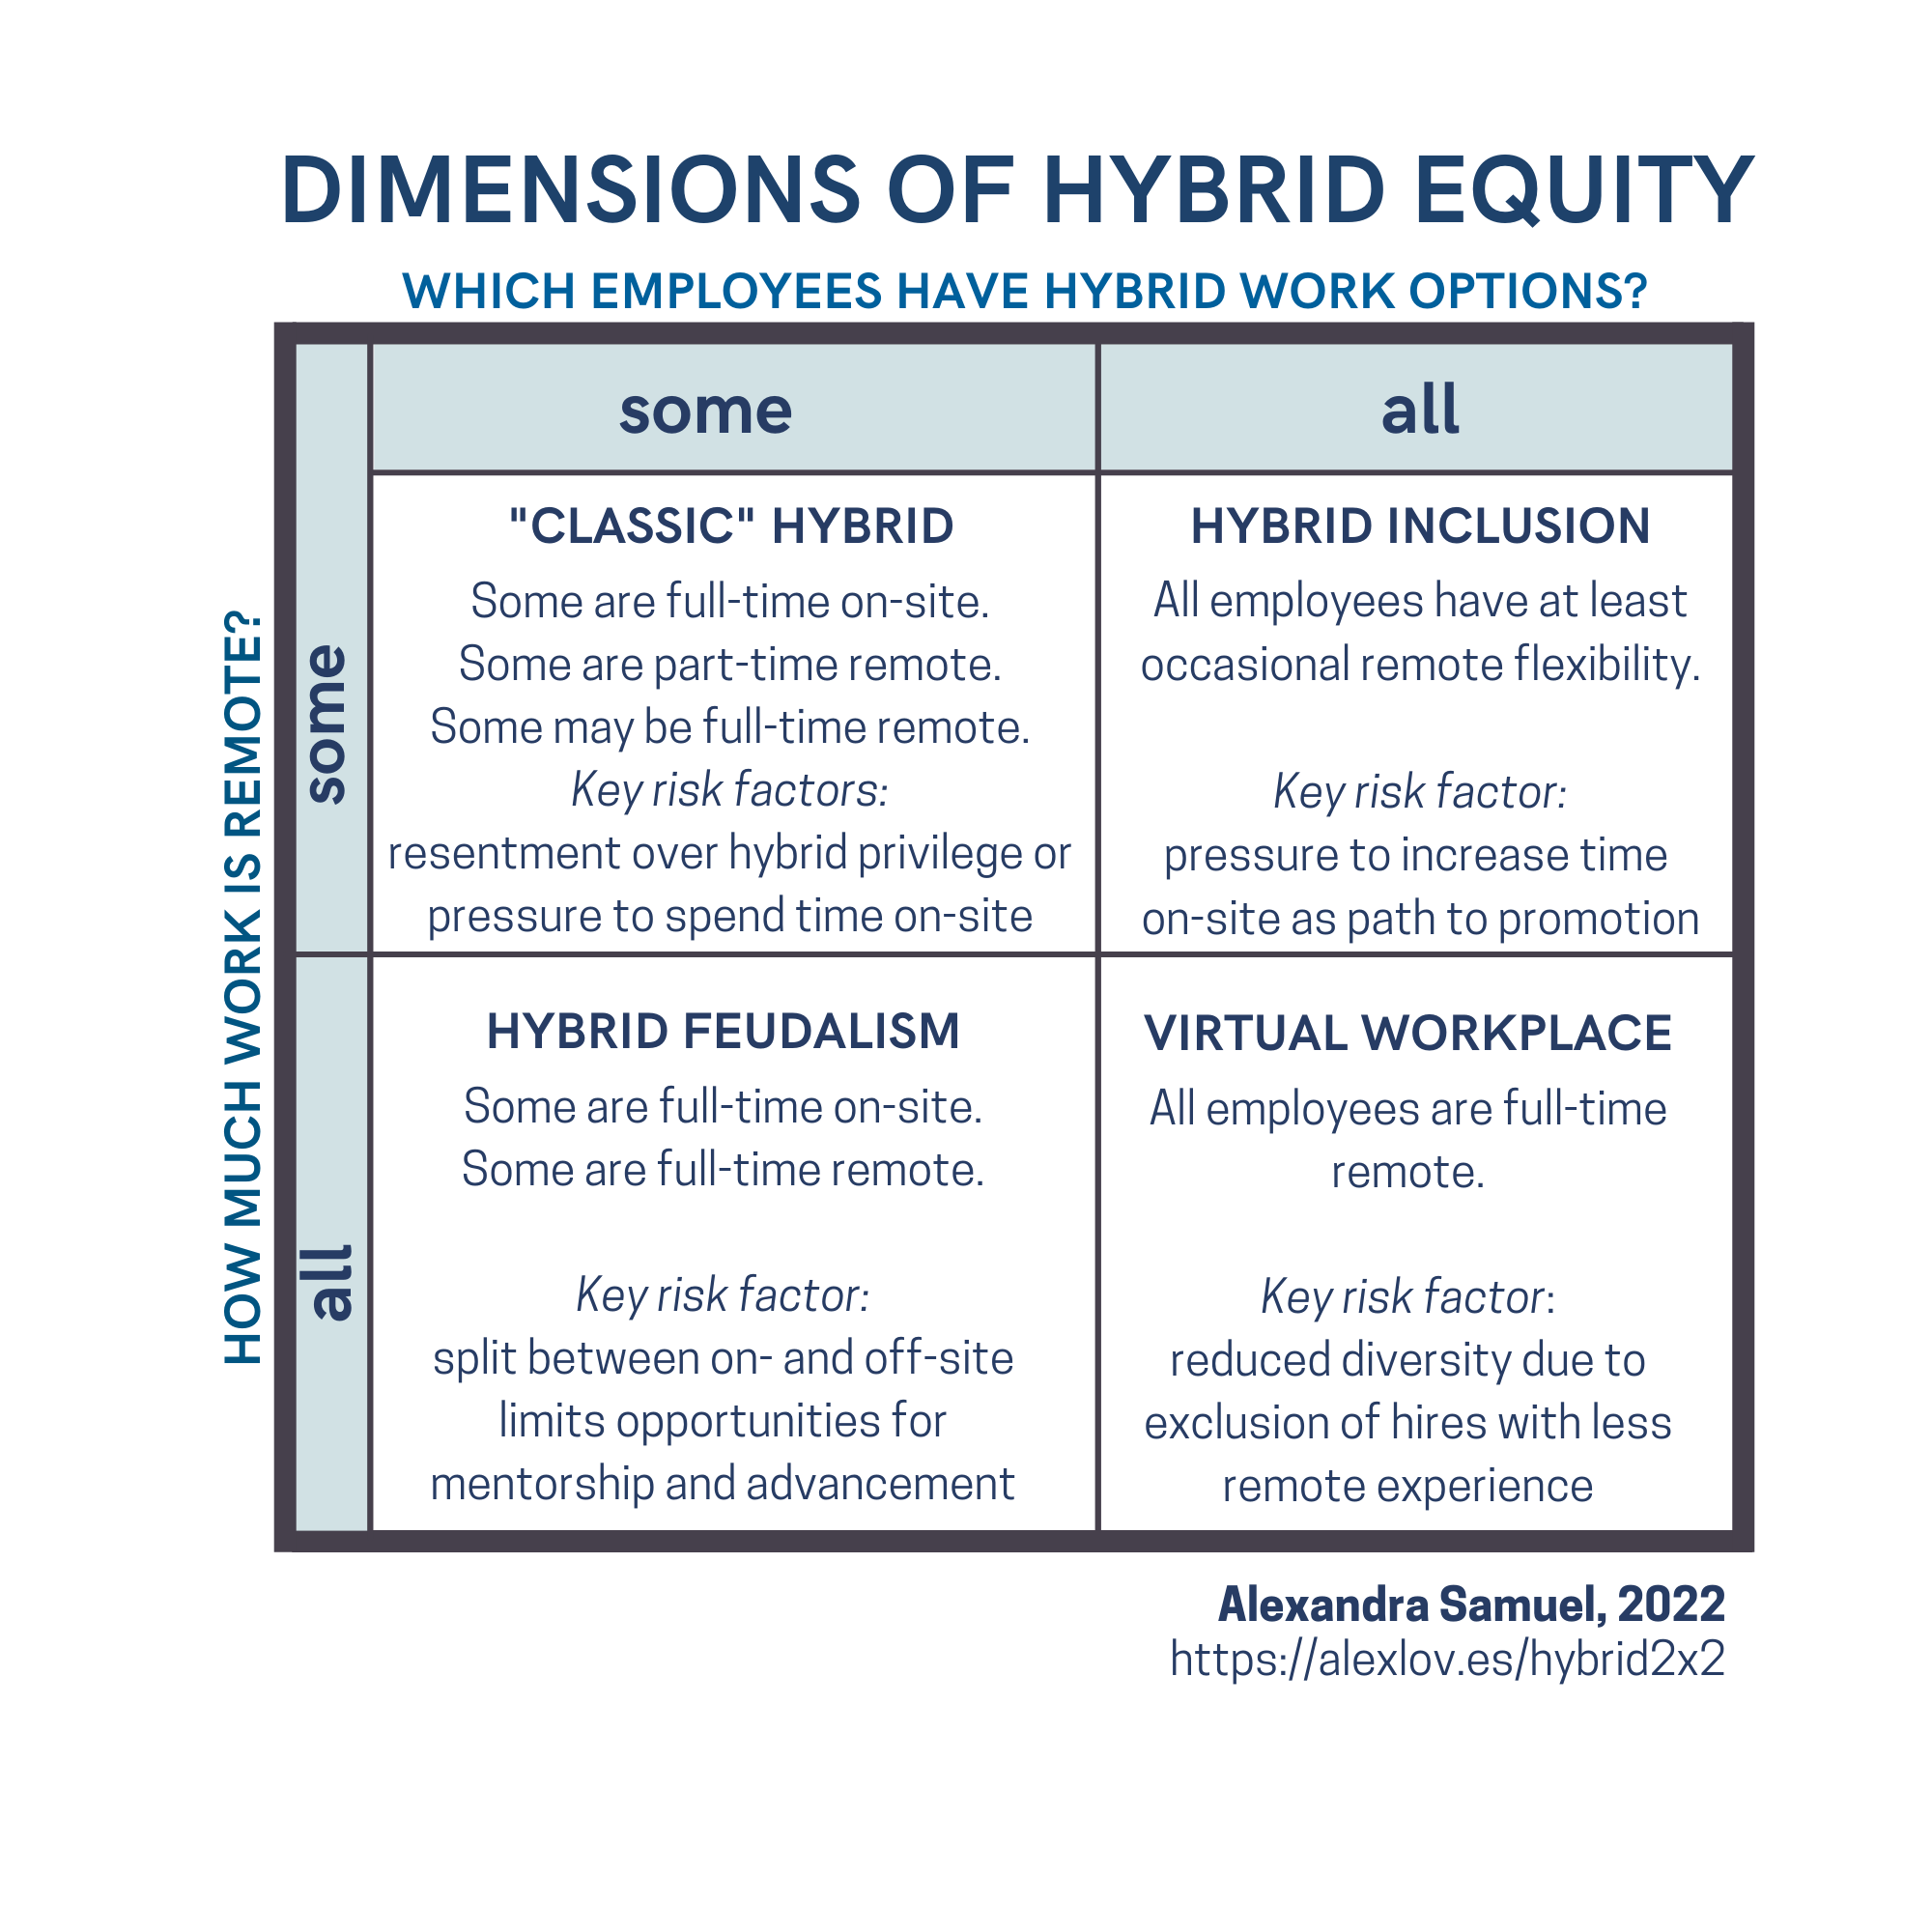 diagram showing dimensions of hybrid equity